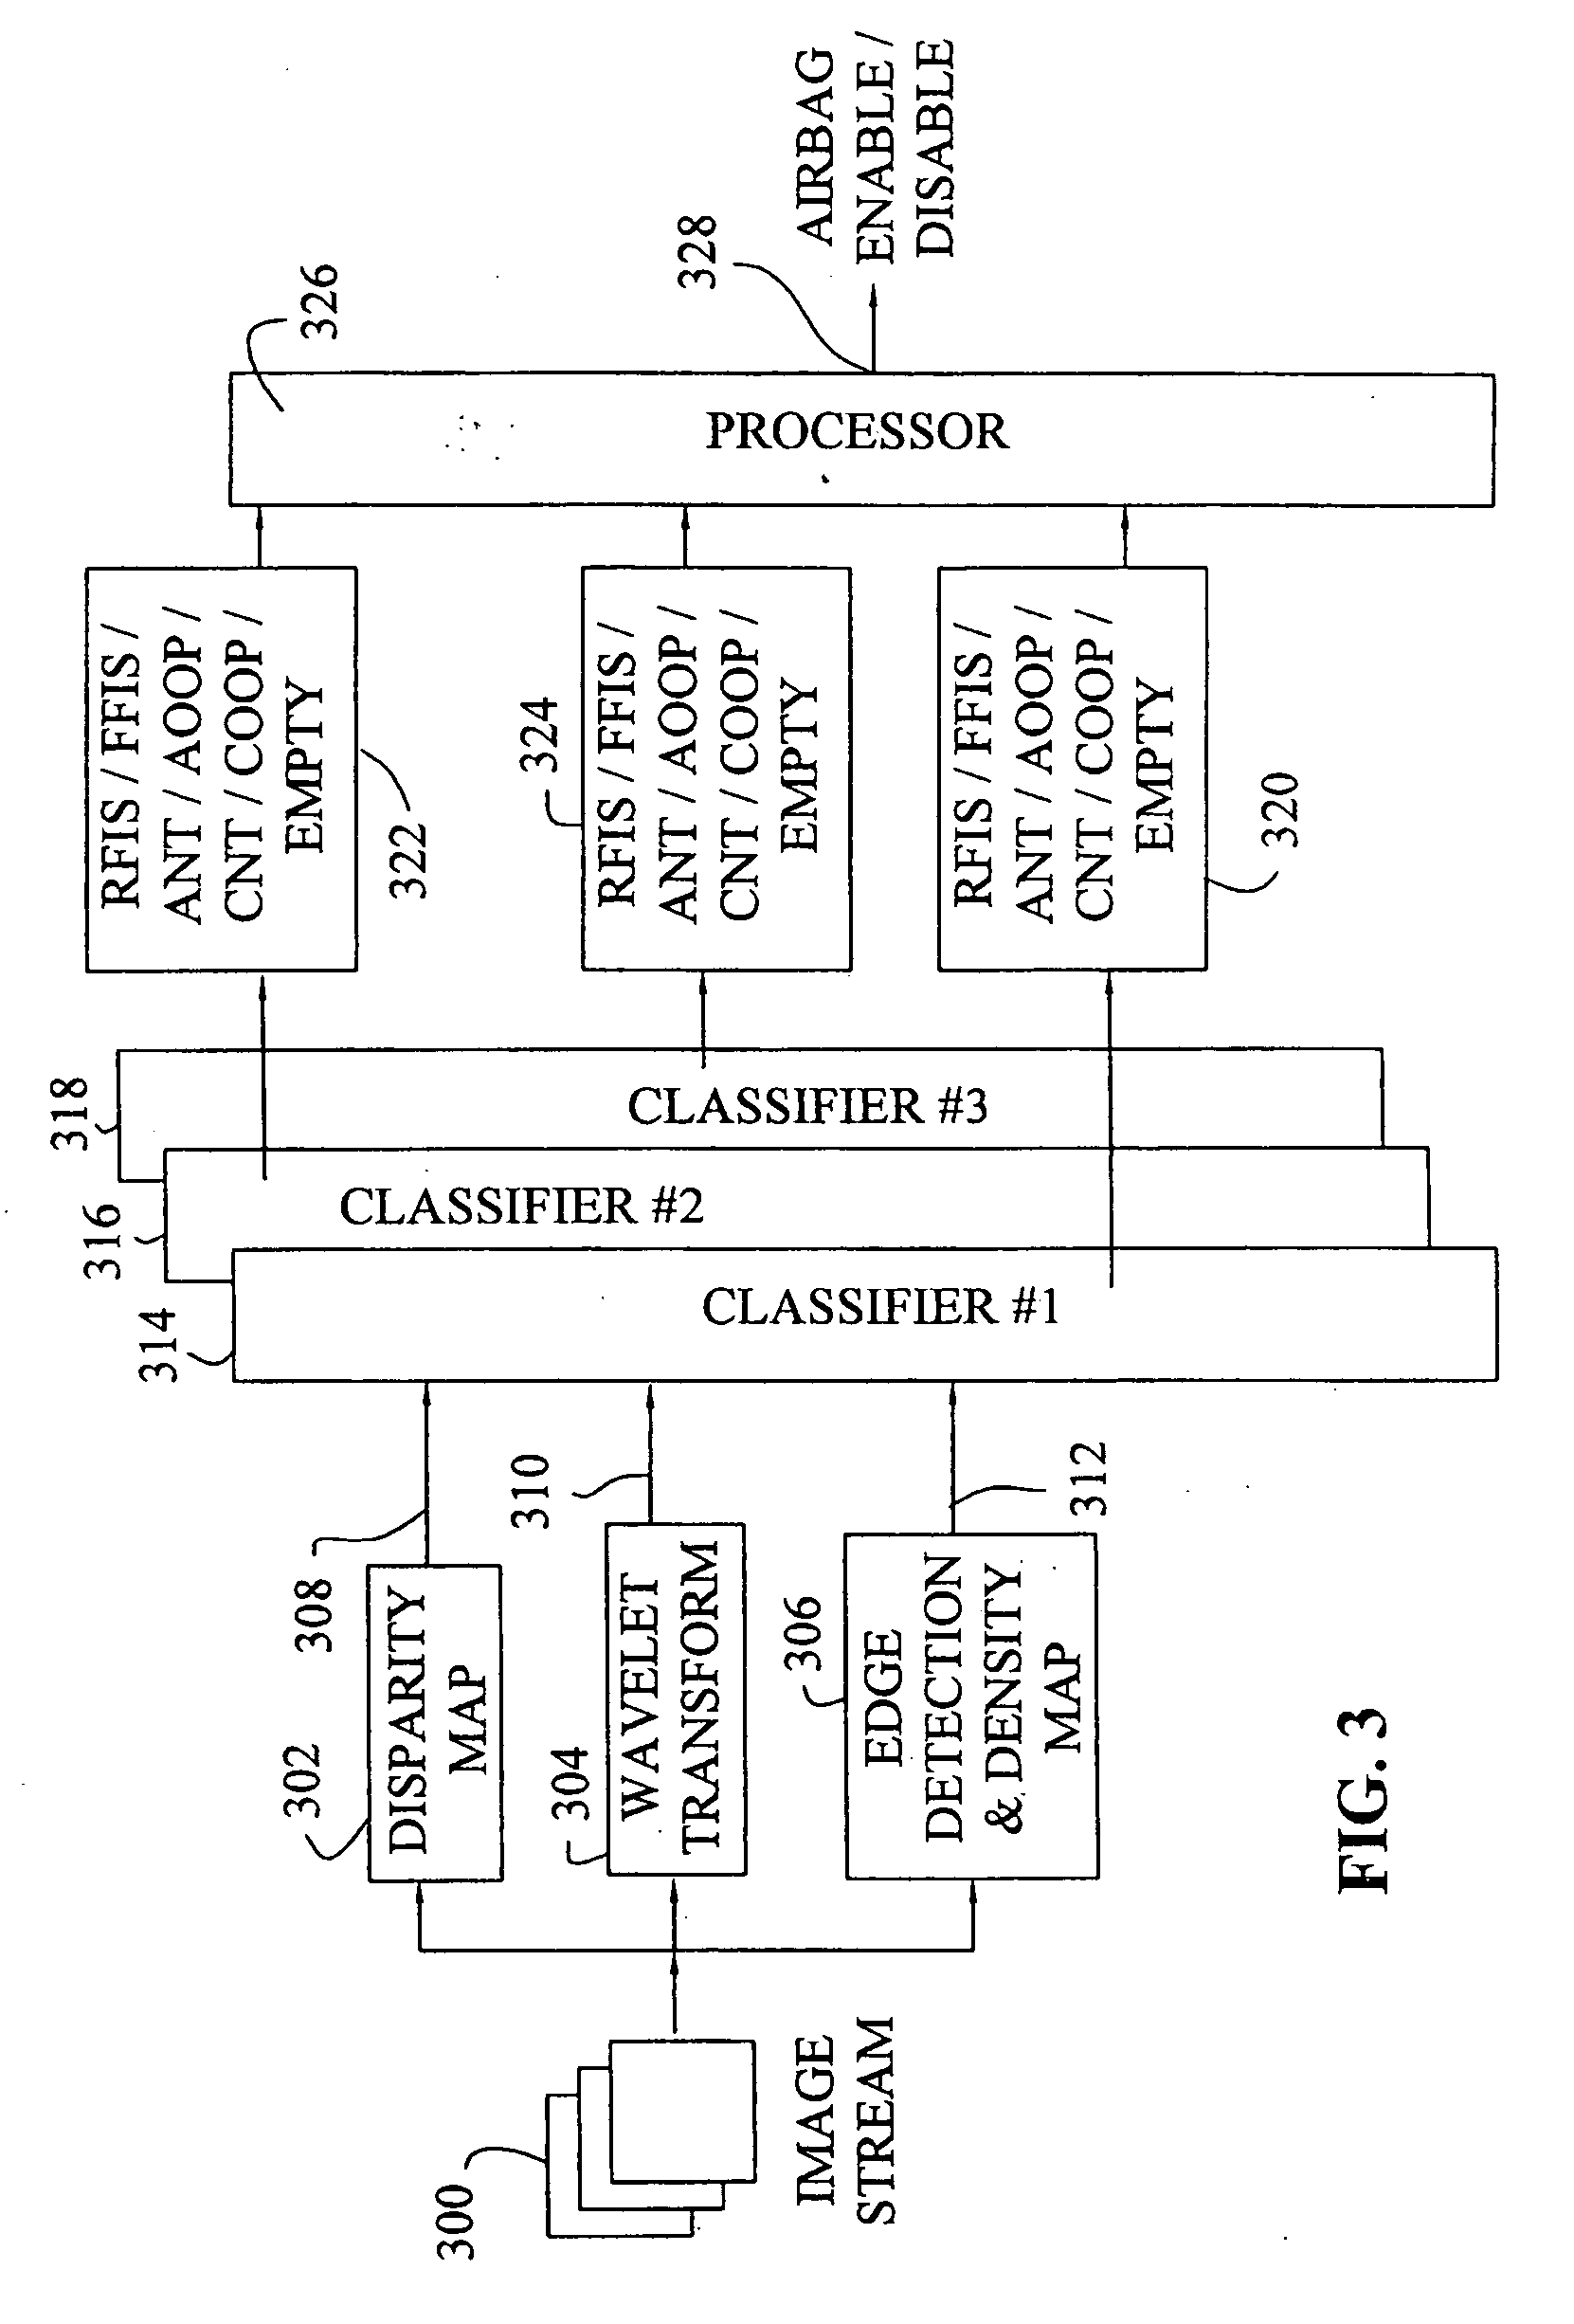 Method and apparatus for recognizing the position of an occupant in a vehicle